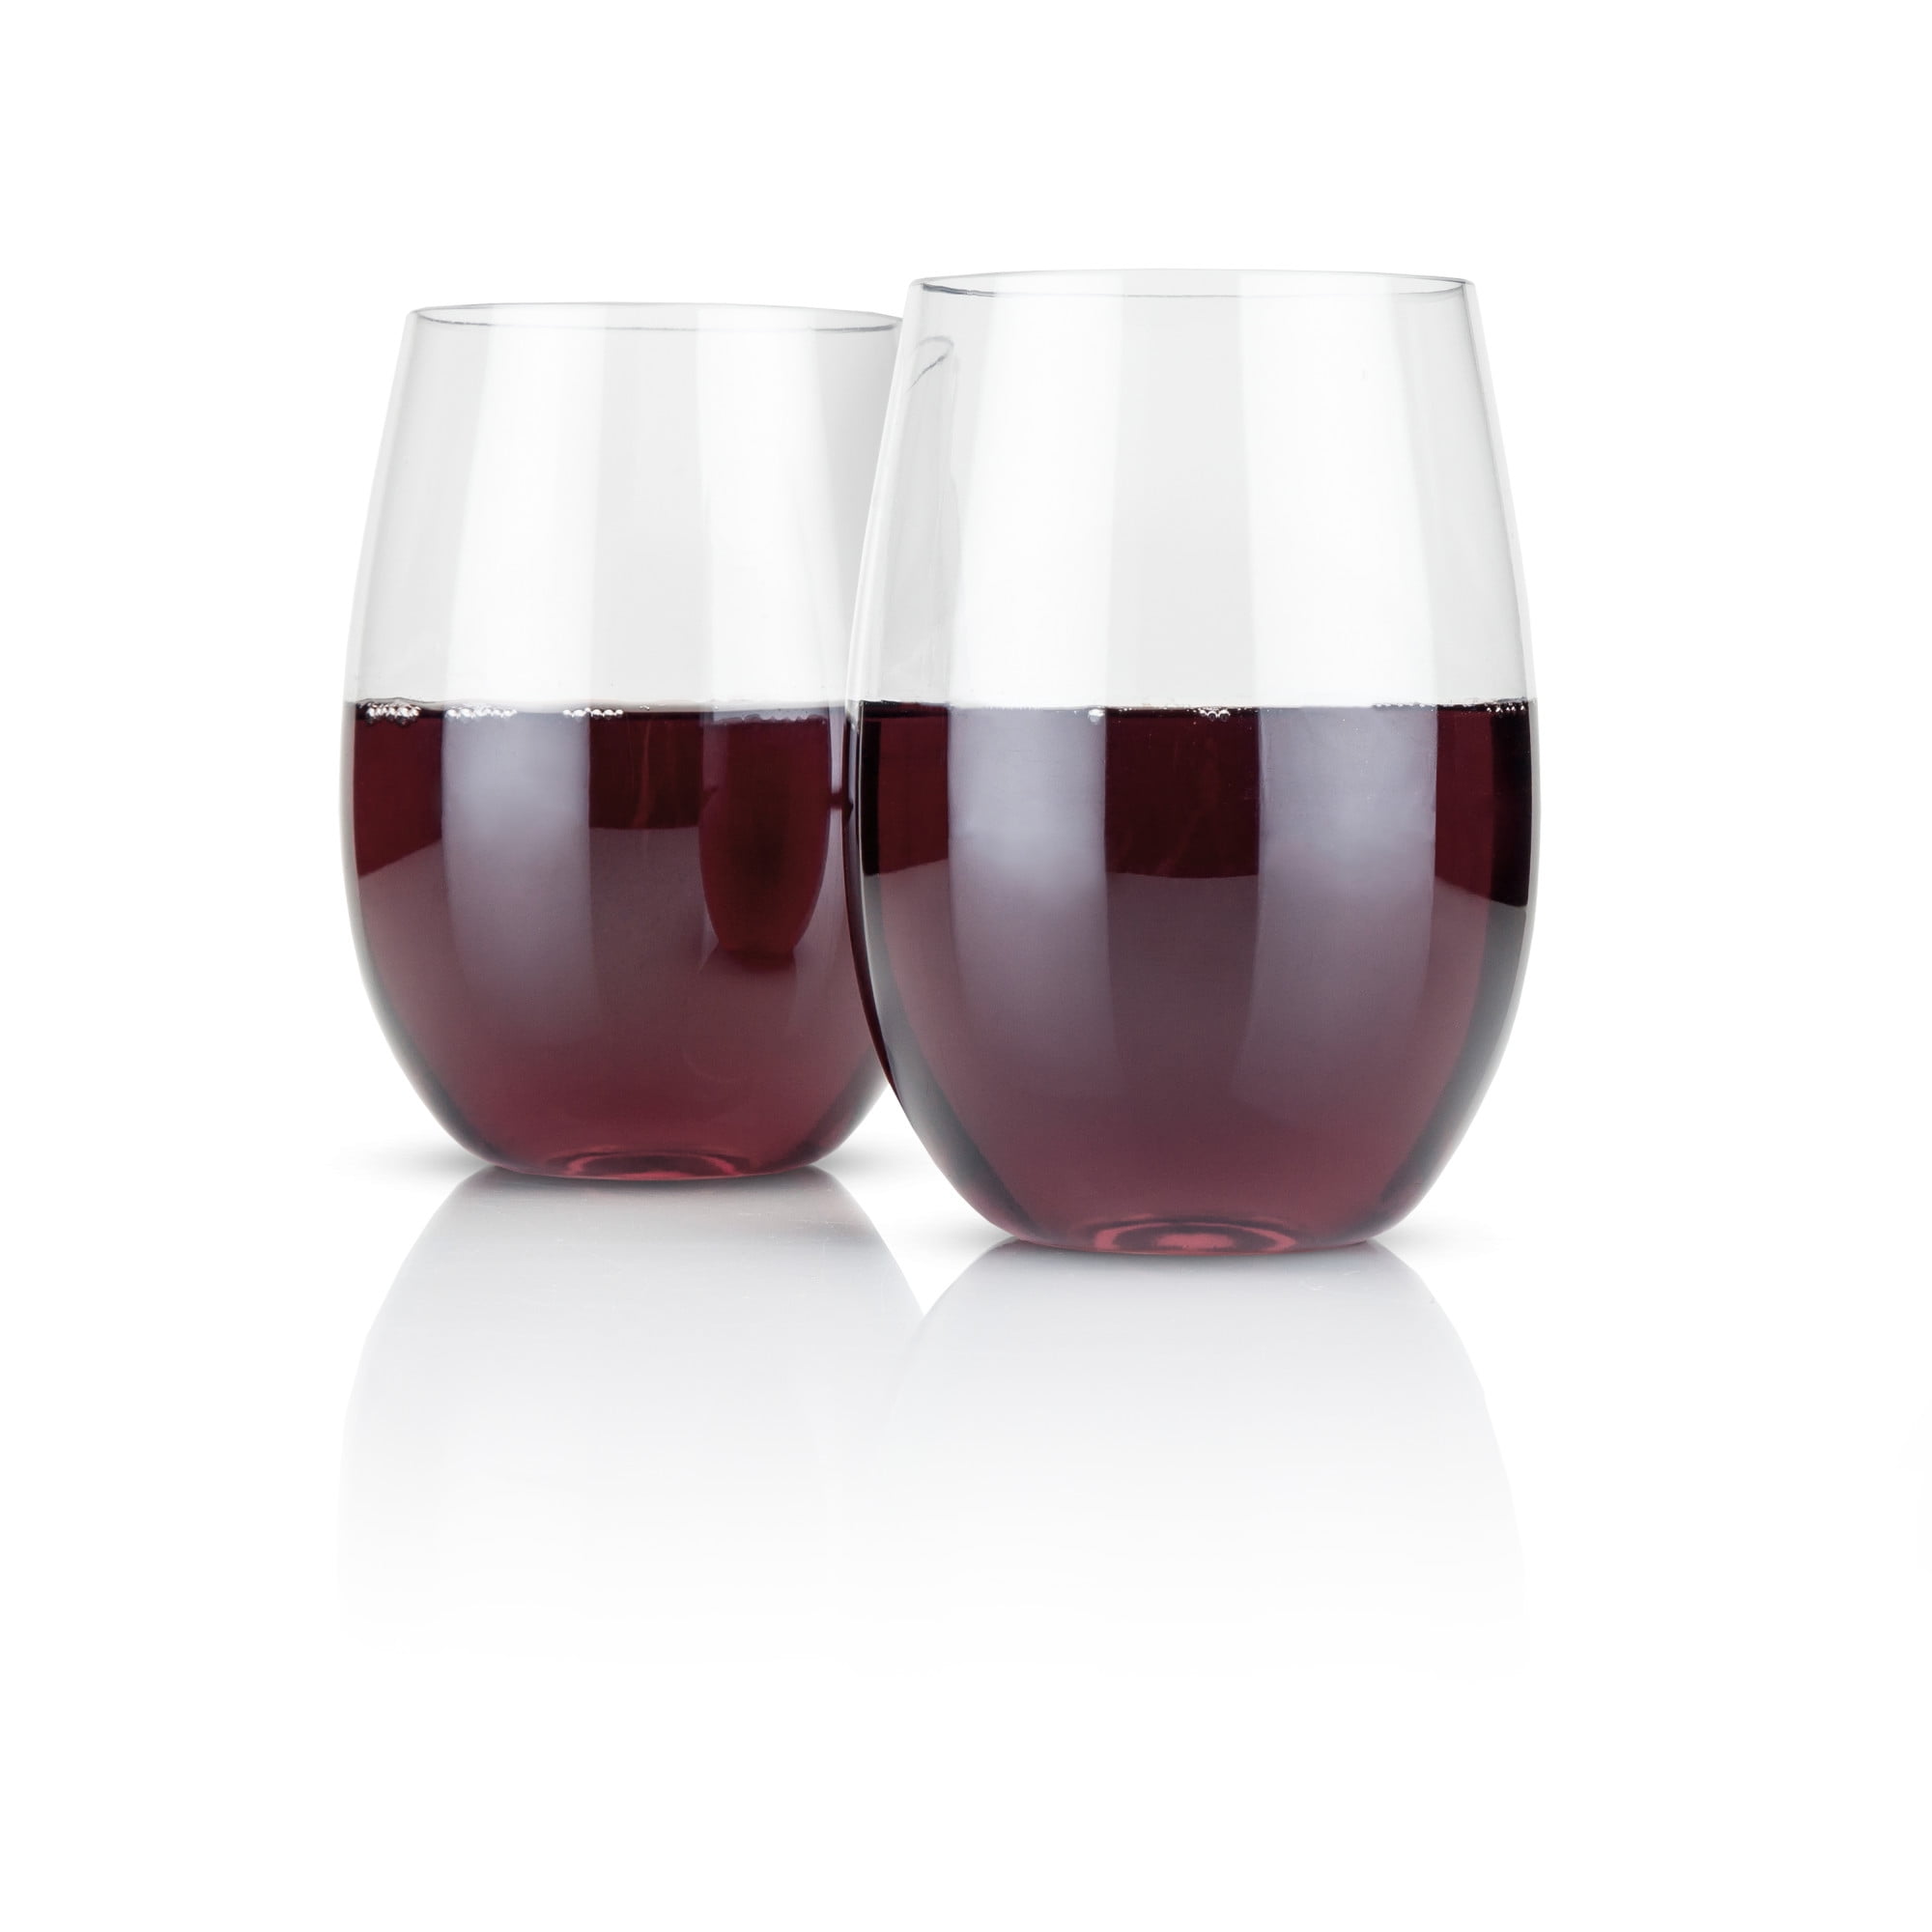 Basics All-Purpose Wine Glasses, 19-Ounce, Set of 4, Clear